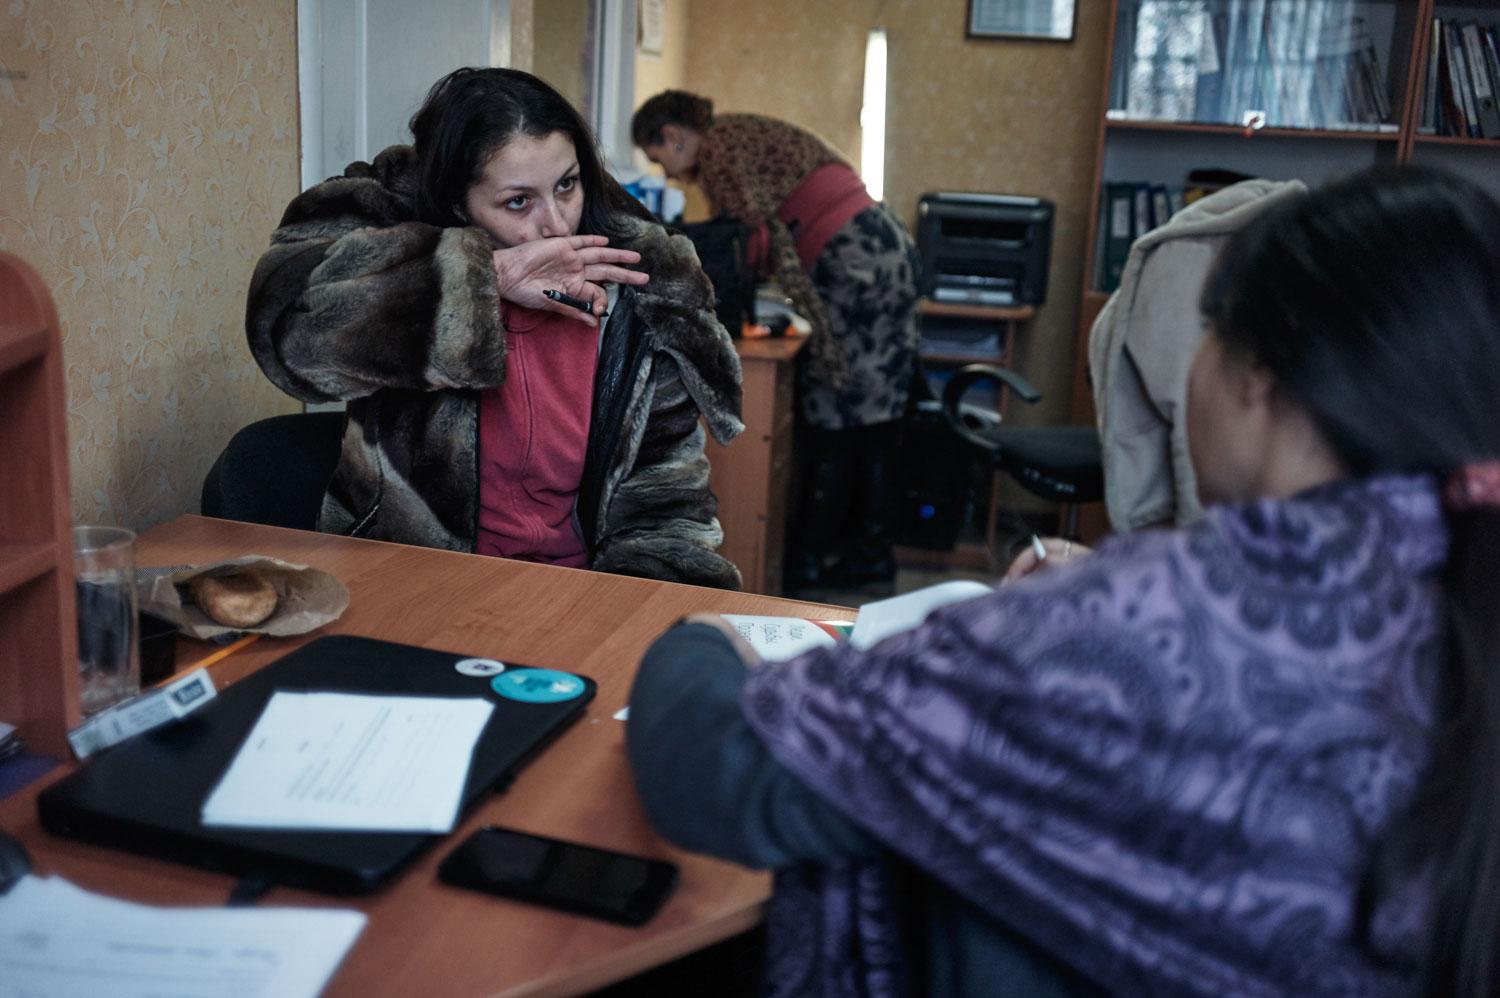 Irina, 28, (left) fled the war from Enakievo, a town now under separatist control in eastern Ukraine. She is an intravenous drug user and receives substitution therapy which was made illegal by separatists. NGO Svitanok Club assists her in her hometown Kr